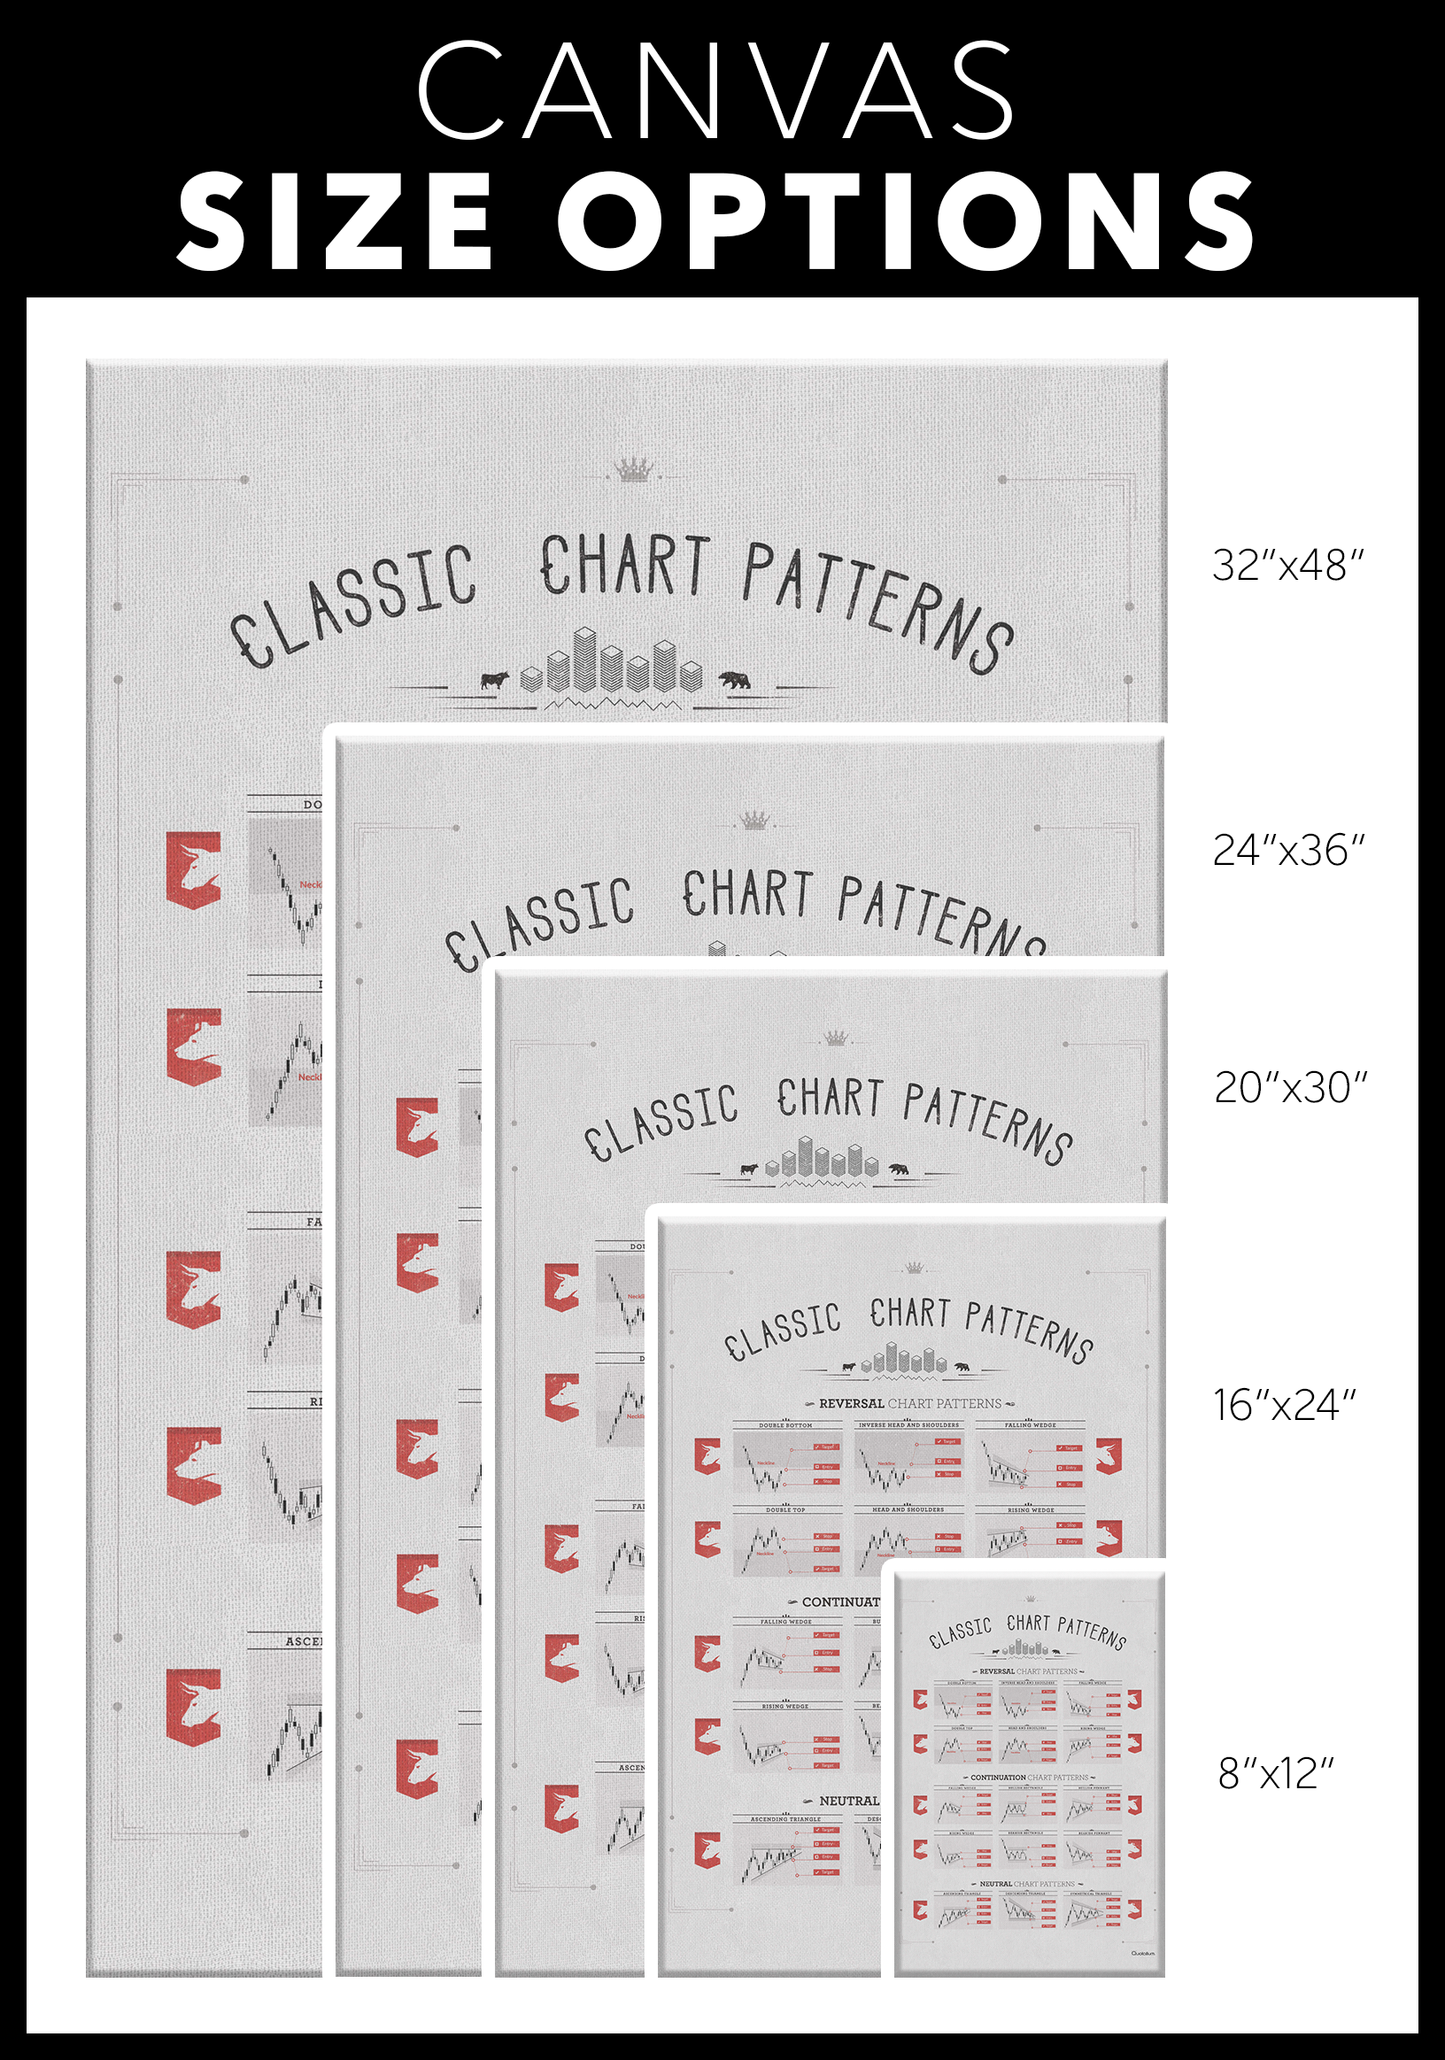 CLASSIC CHART PATTERNS POSTER. Stock Market CANVAS.